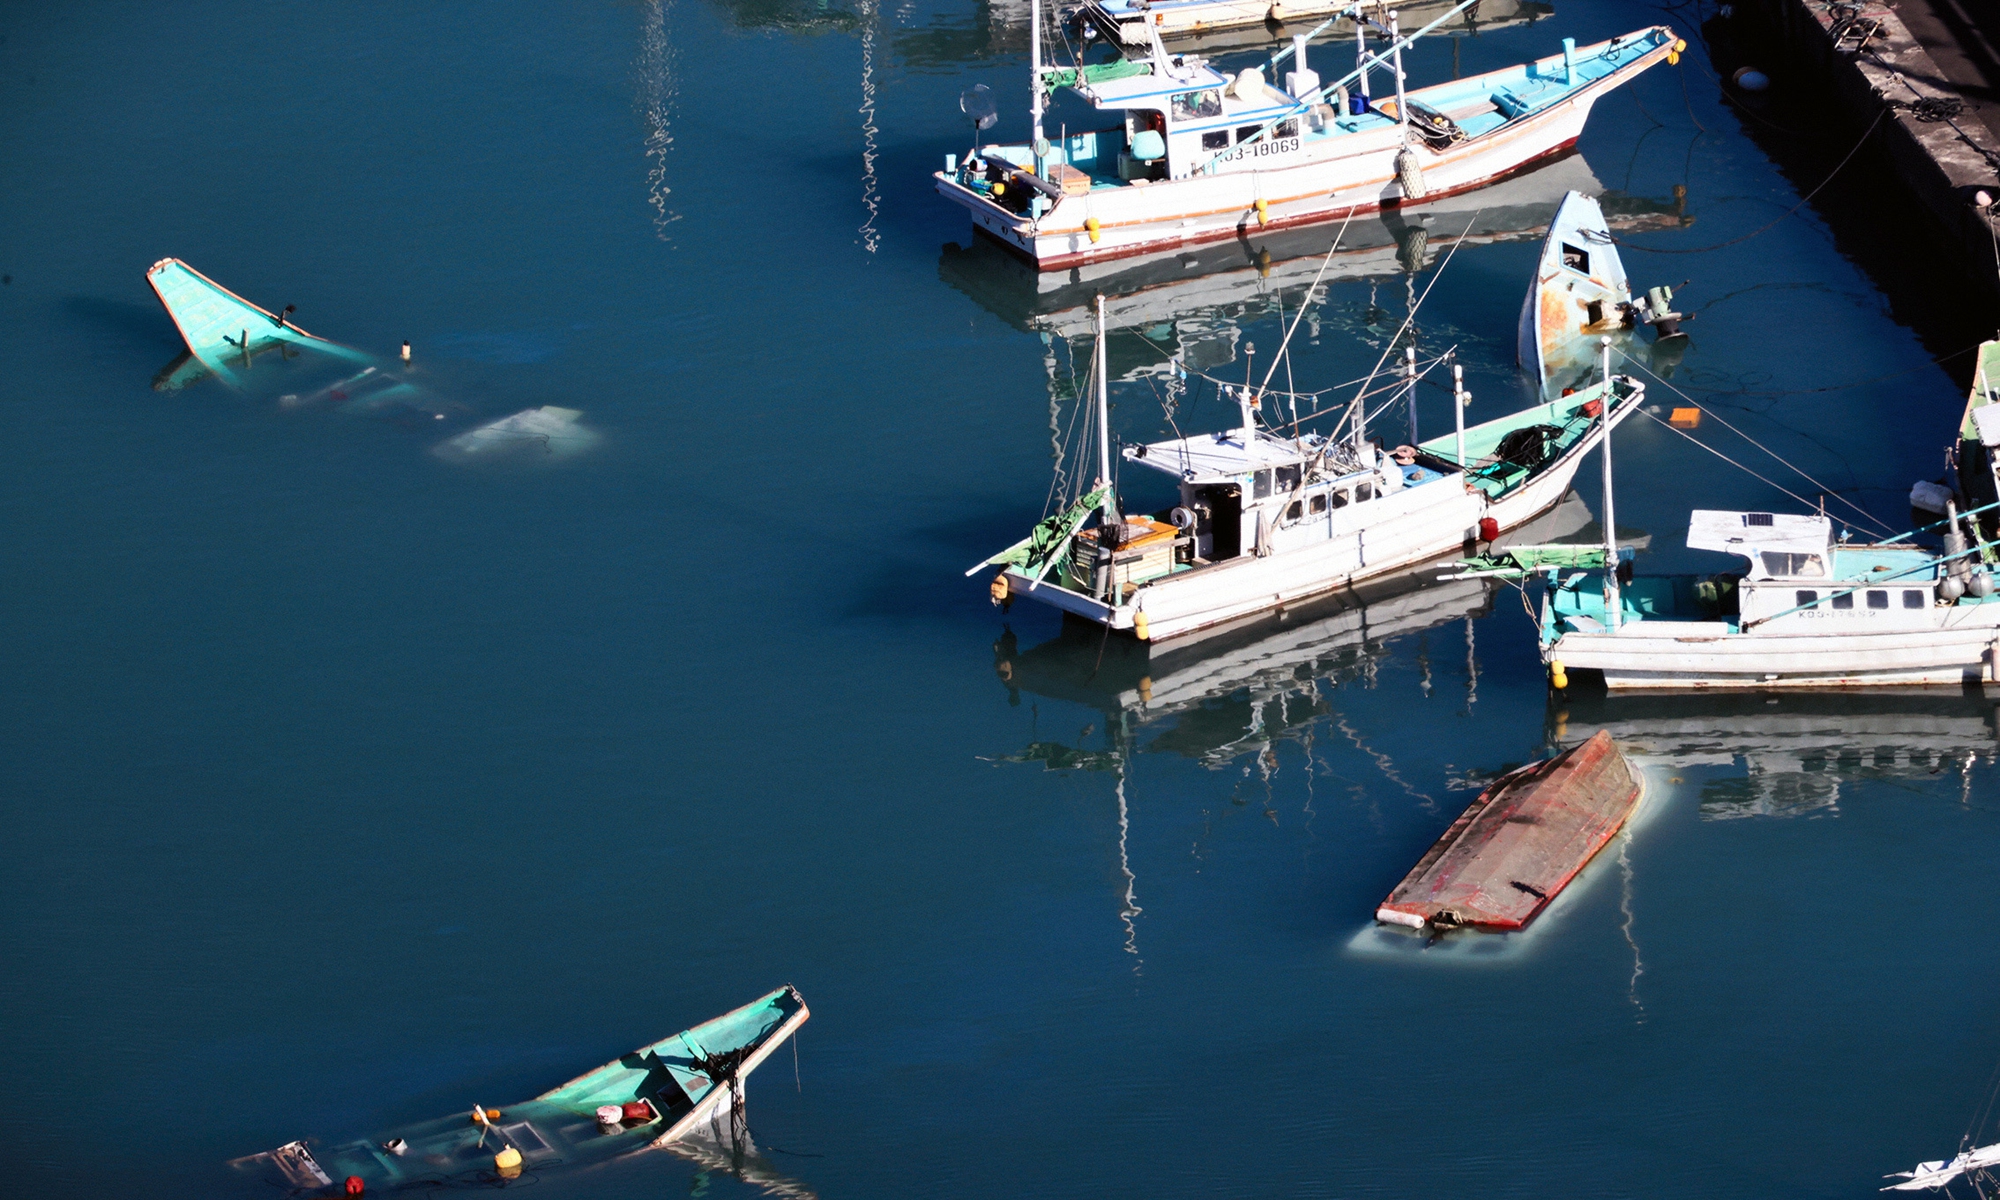 In this aerial image, some fishing boats are sunk and overturned in Muroto, Kochi, Japan on January 16, 2022 after the tsunami triggered by a massive volcanic eruption in Tonga. No casualties were reported in Japan. Photo: VCG